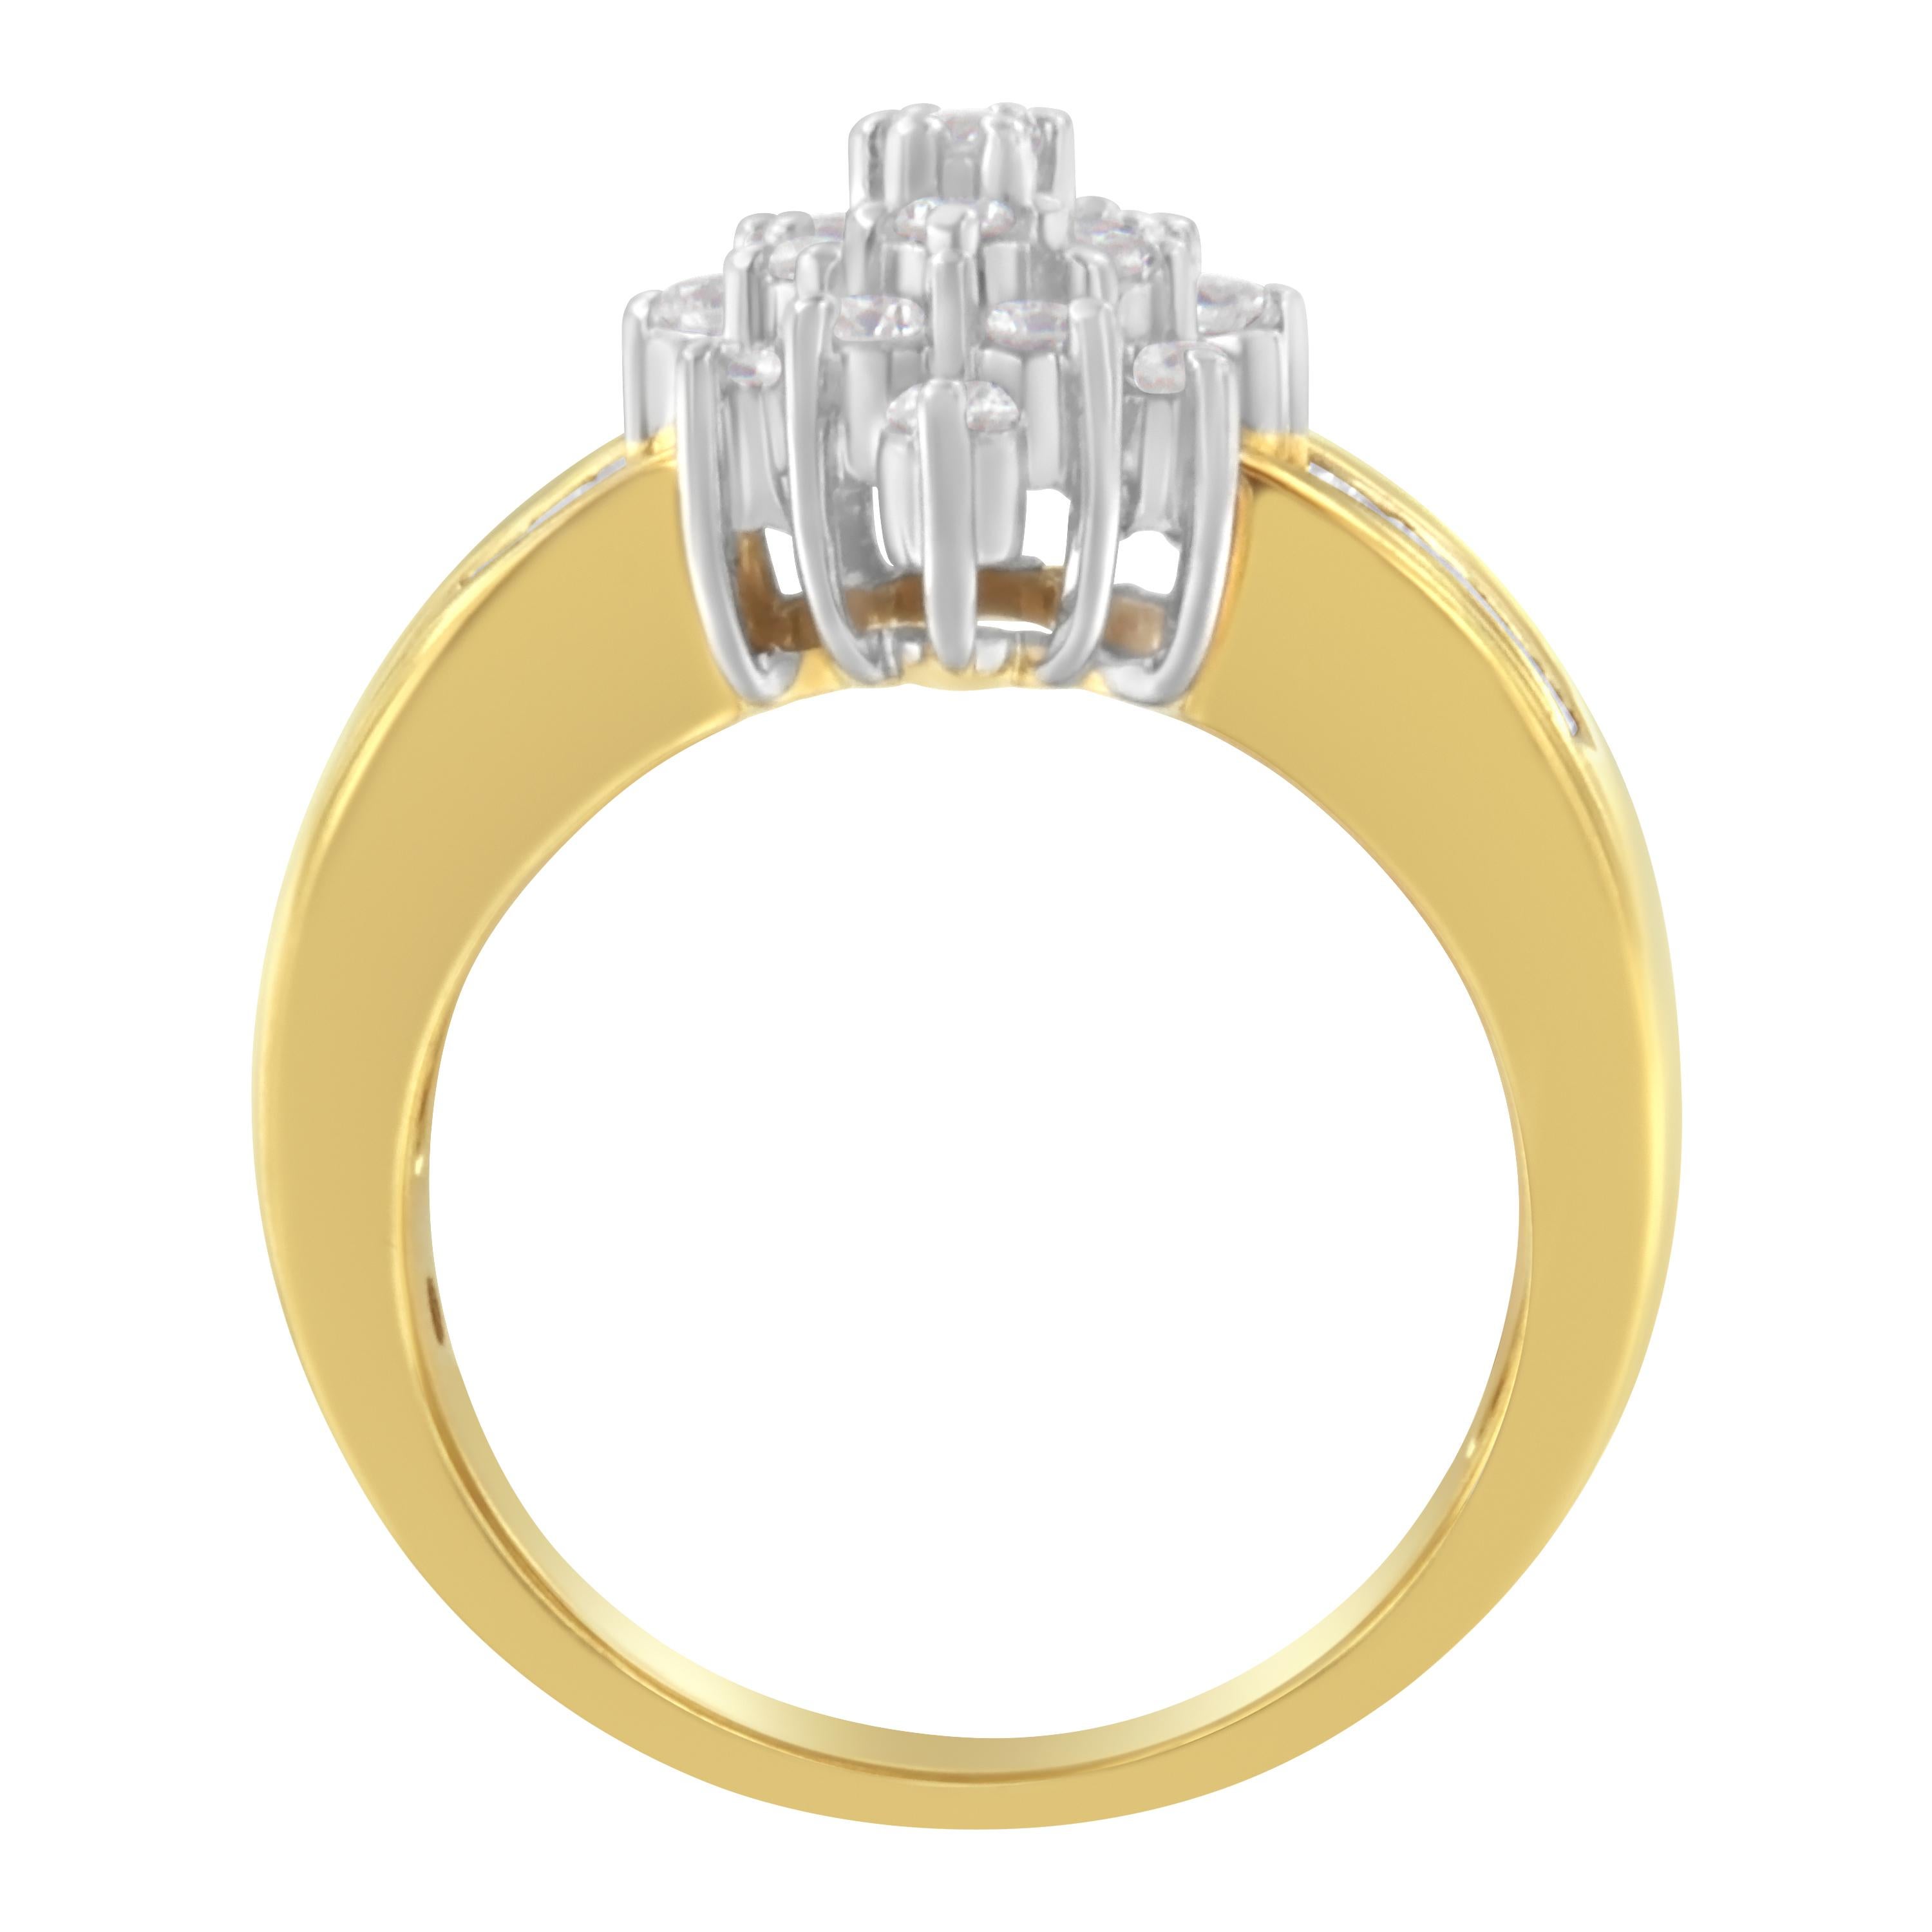 Luxe and lustrous, this diamond ring is a stunning choice she won't be able to resist. Created with weaves of warm 10K gold, this marvelous style showcases a dazzling marquise-shaped composite of diamonds. The sculpted shank glistens with two rows